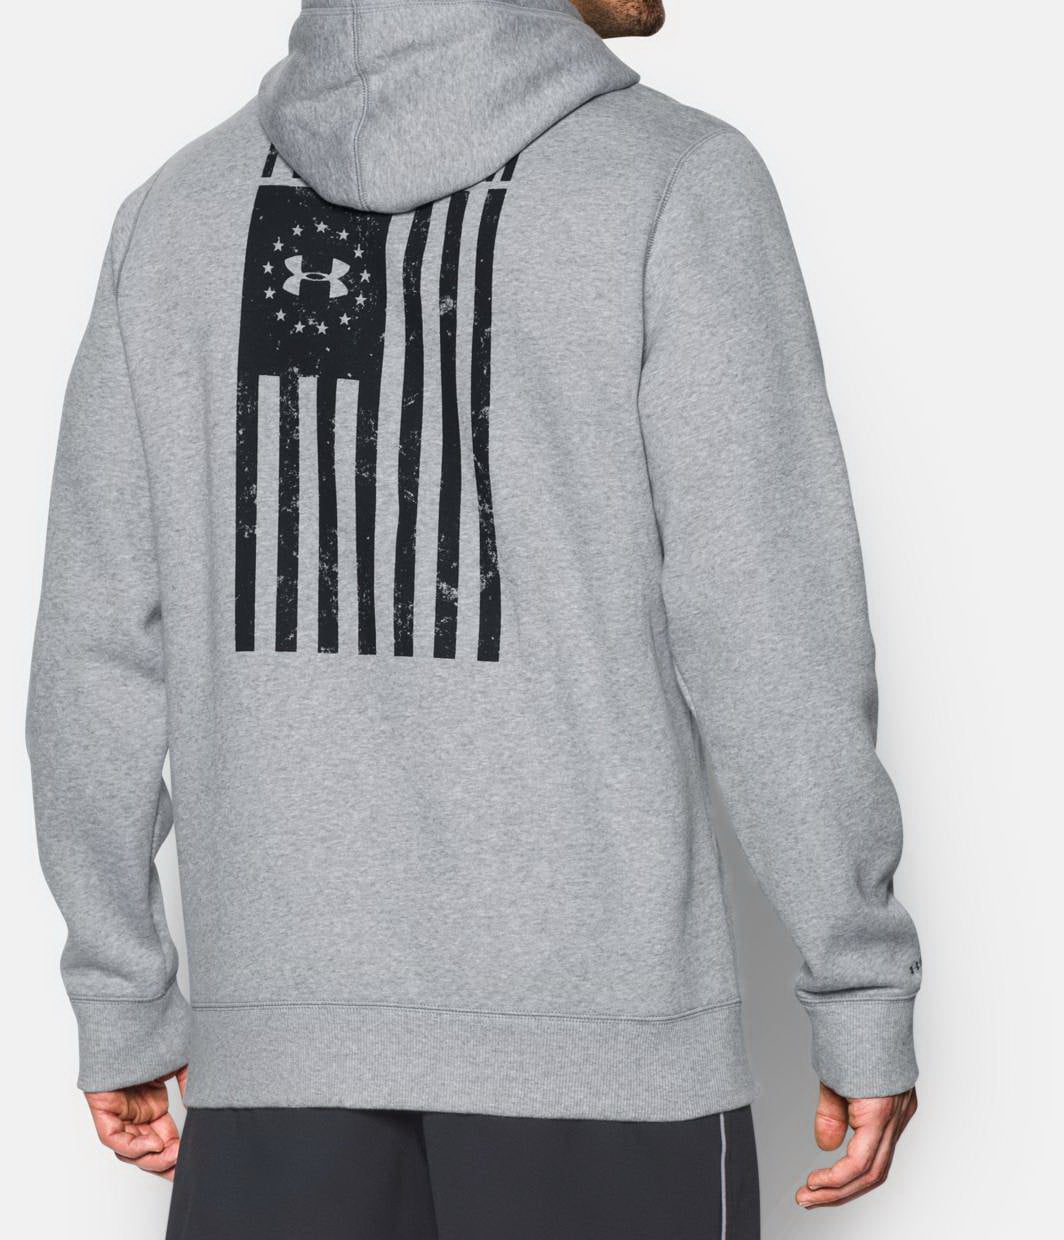 Under Armour Tops Freedom Flag Rival Hoodie 1299262-025 - Walmart.com